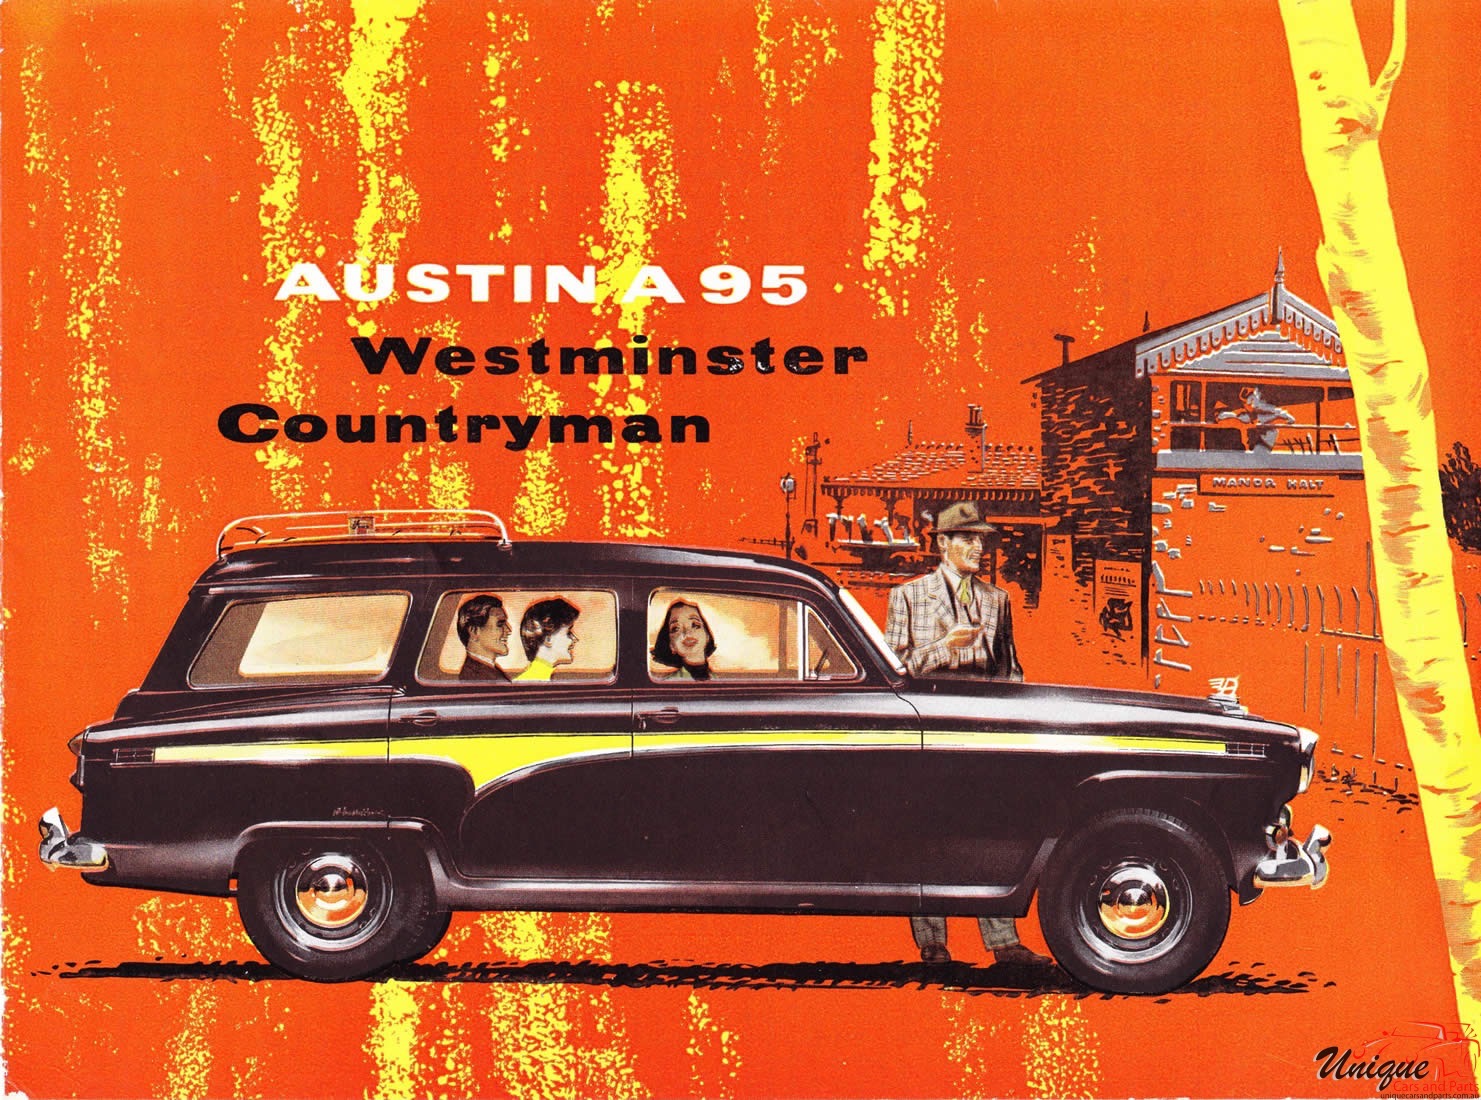 1956 Austin A95 Westminster Countryman (Netherlands) Brochure Page 3